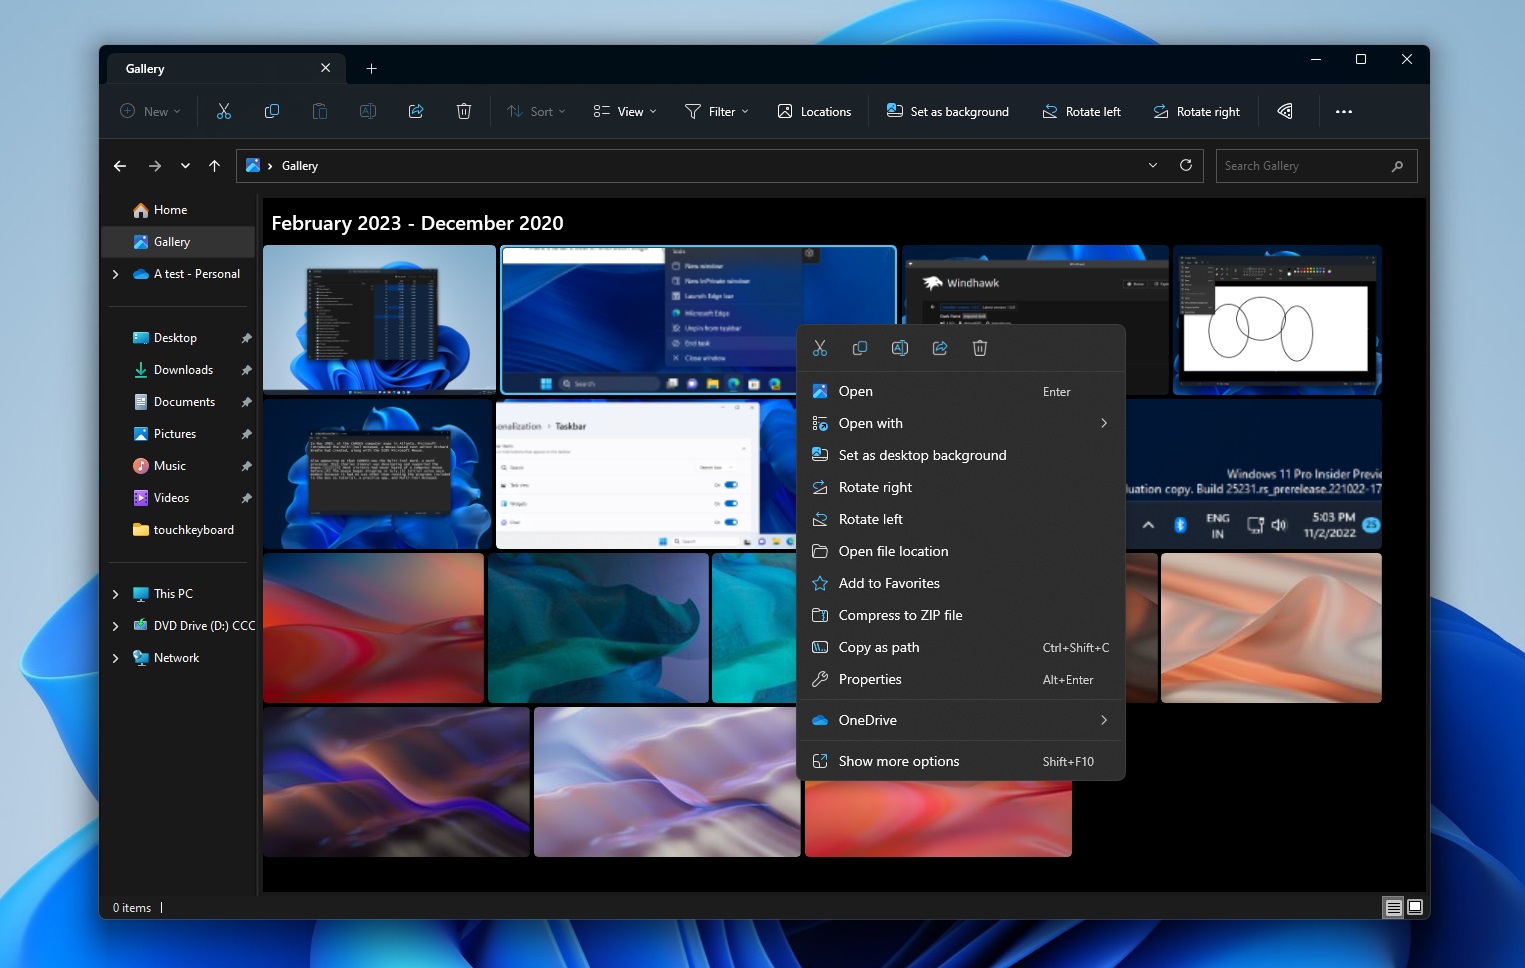 New File Explorer Gallery view